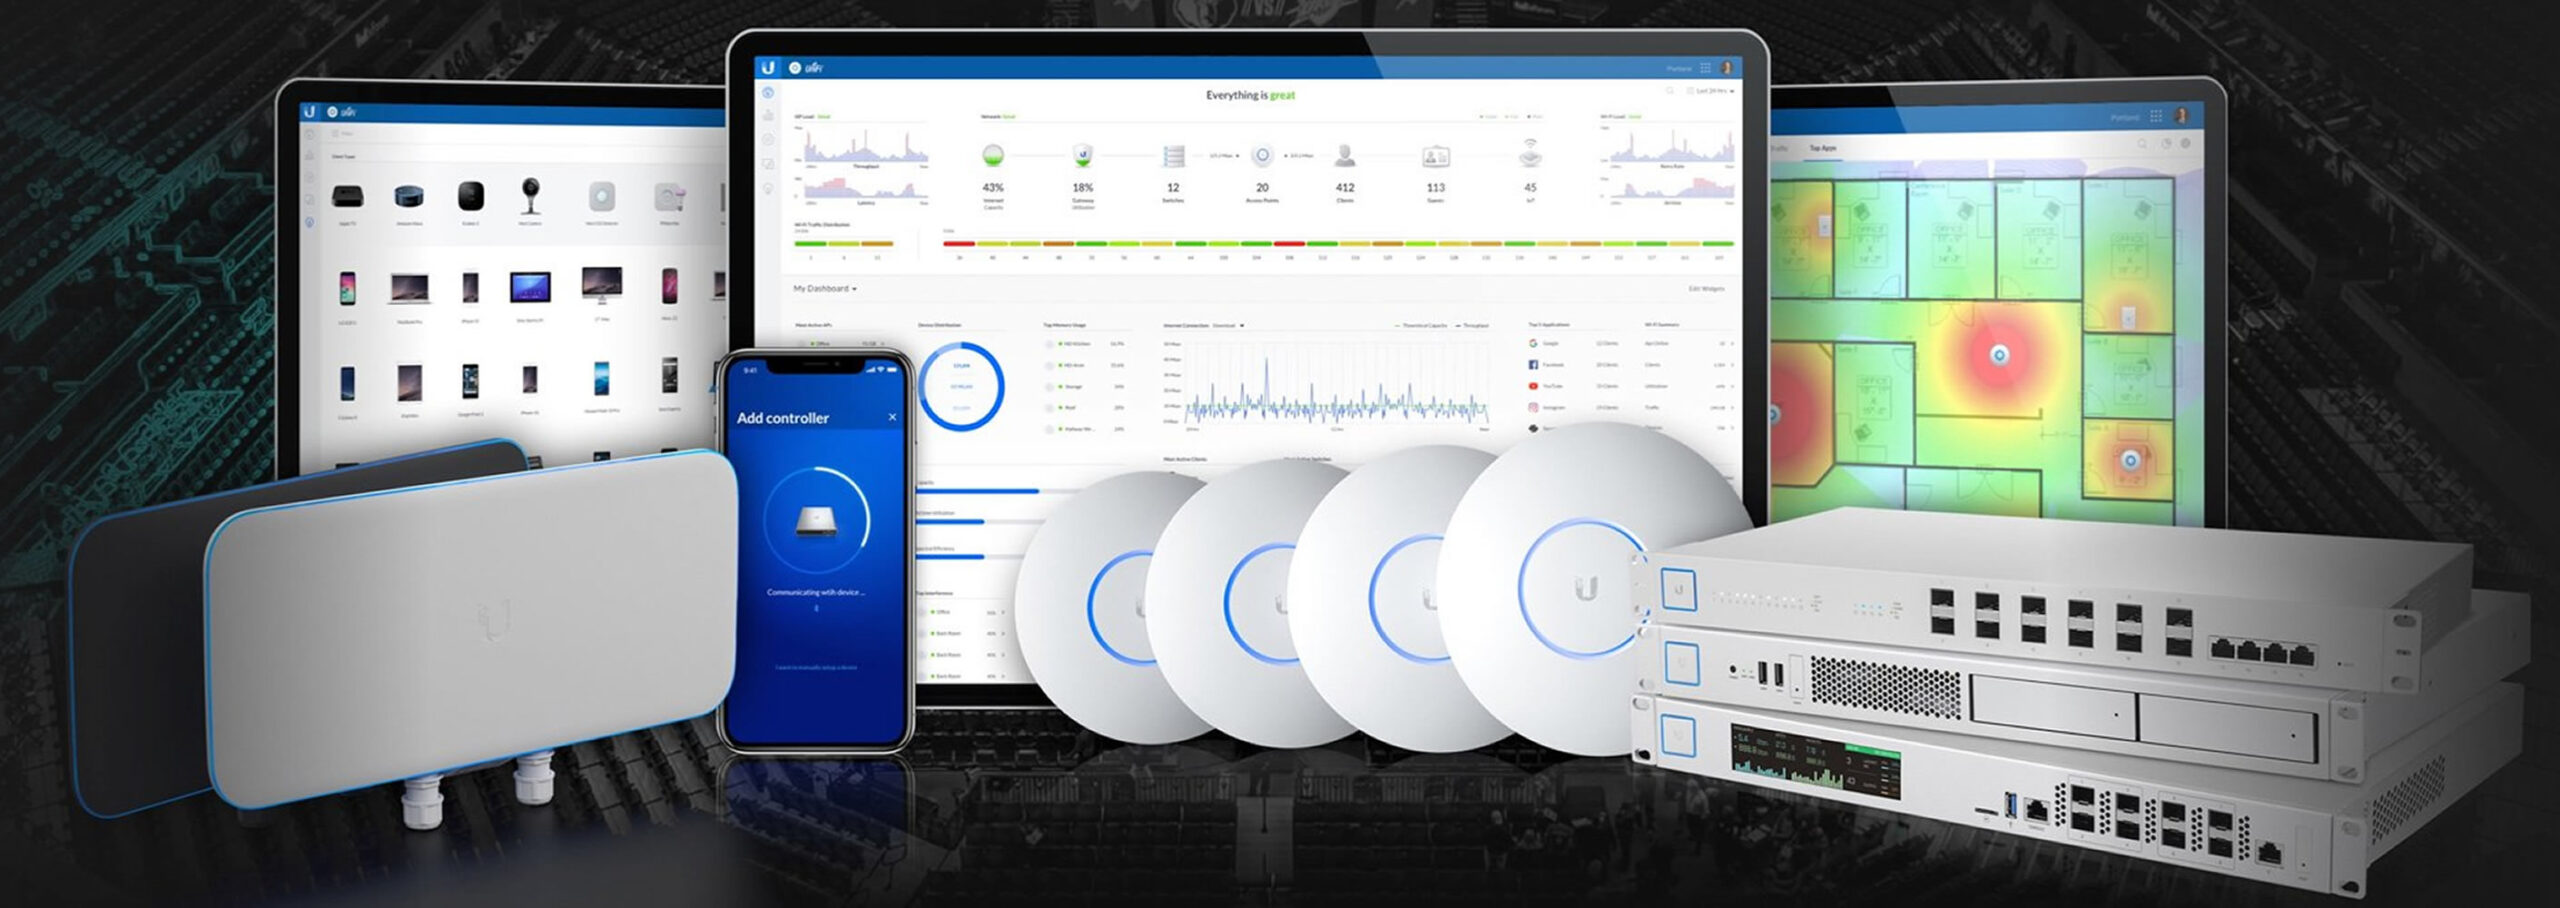 Ubiquiti Wi-Fi Secure scalable Wi-Fi for home and business